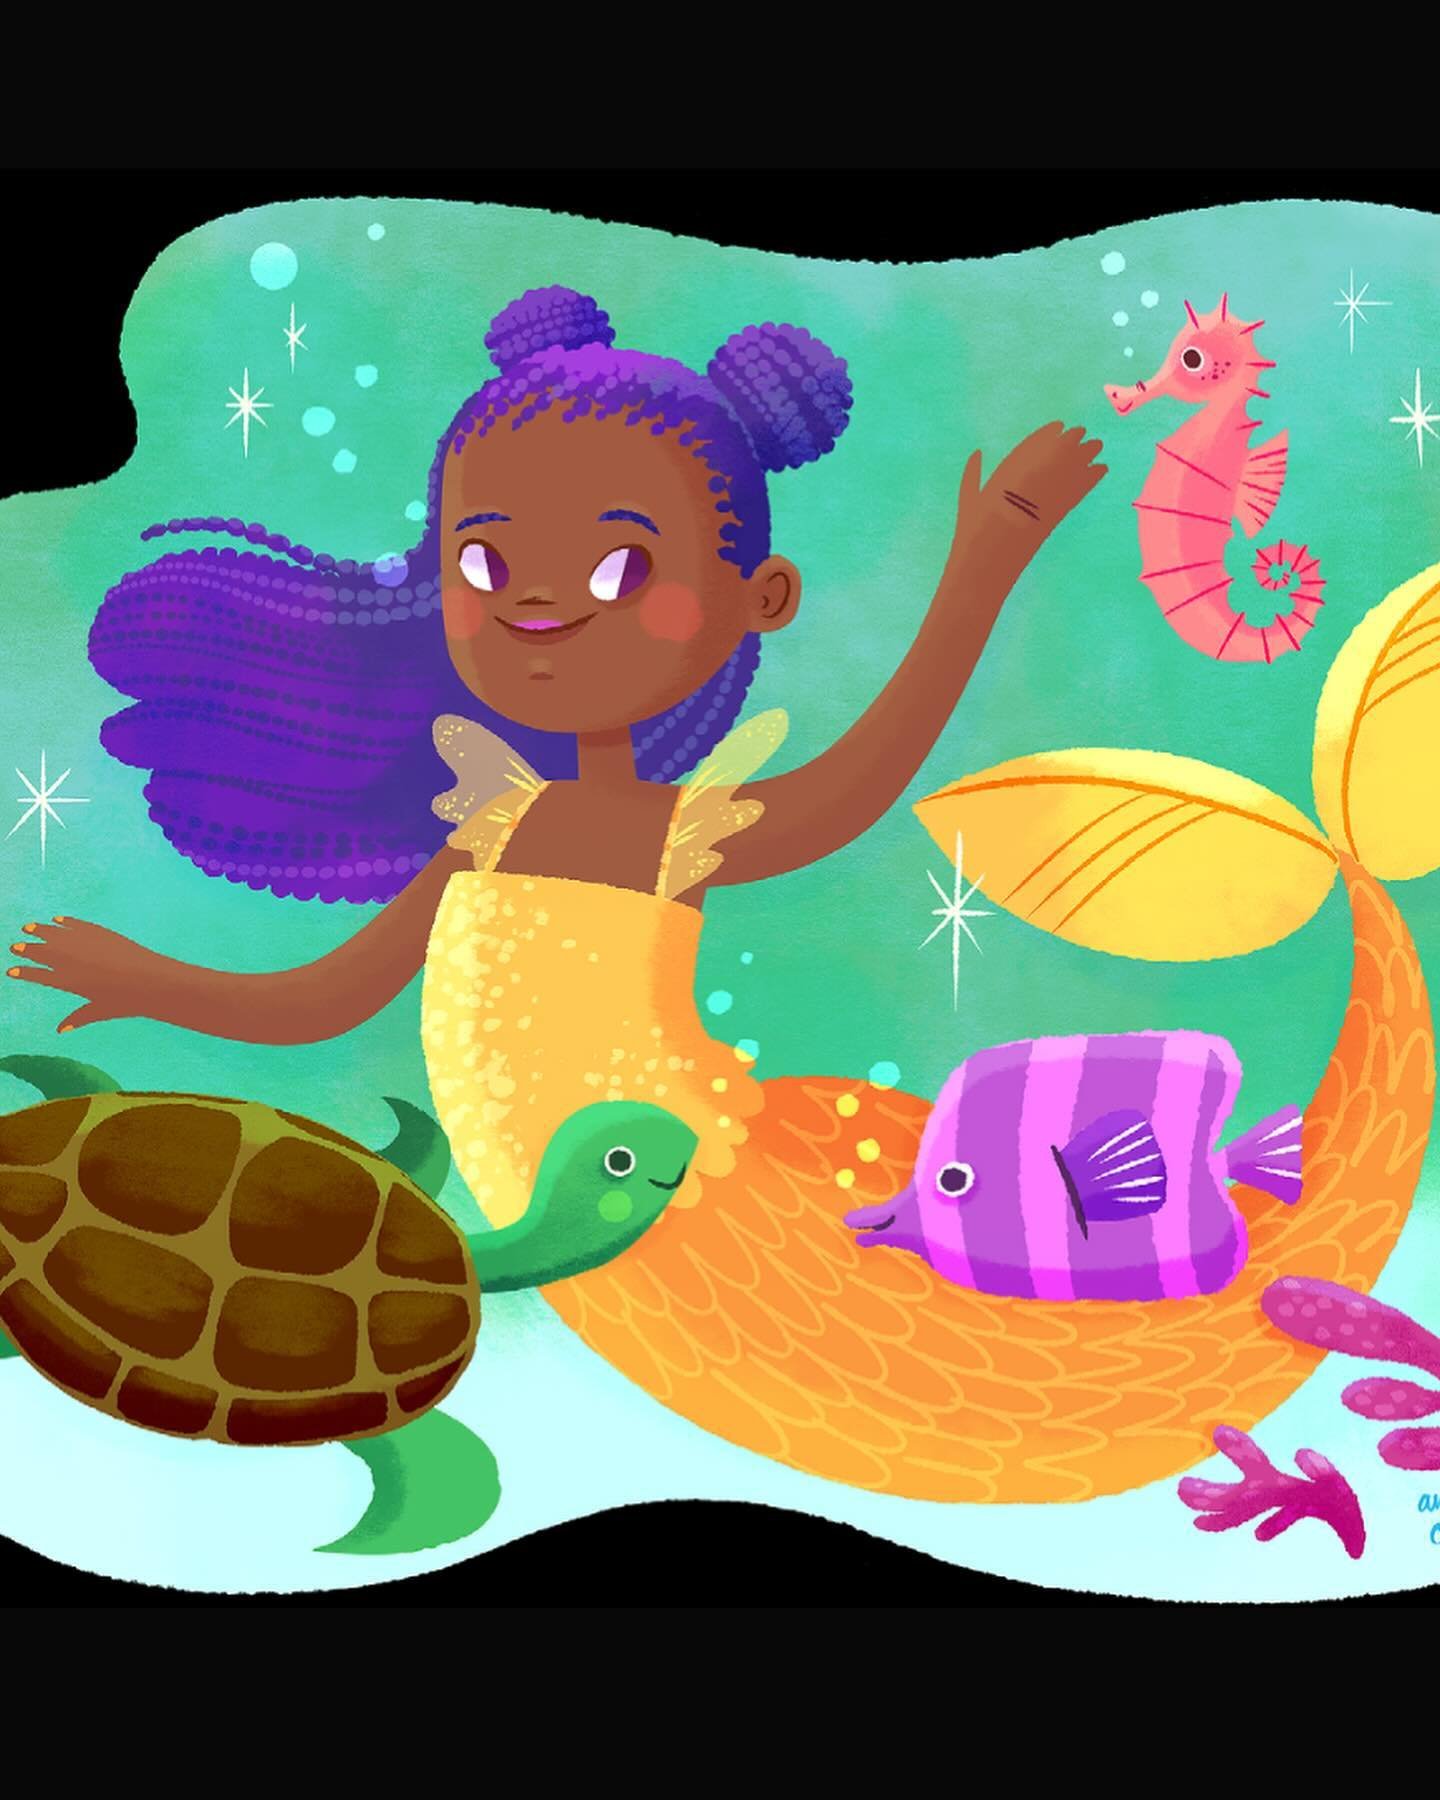 This mermaid would make an adorable puzzle don&rsquo;t you think? I&rsquo;m looking for cute, kid focused work! 🥳 #kidlitart #kidlitillustration #characterart #mermaidart #amandaclarkeillustration